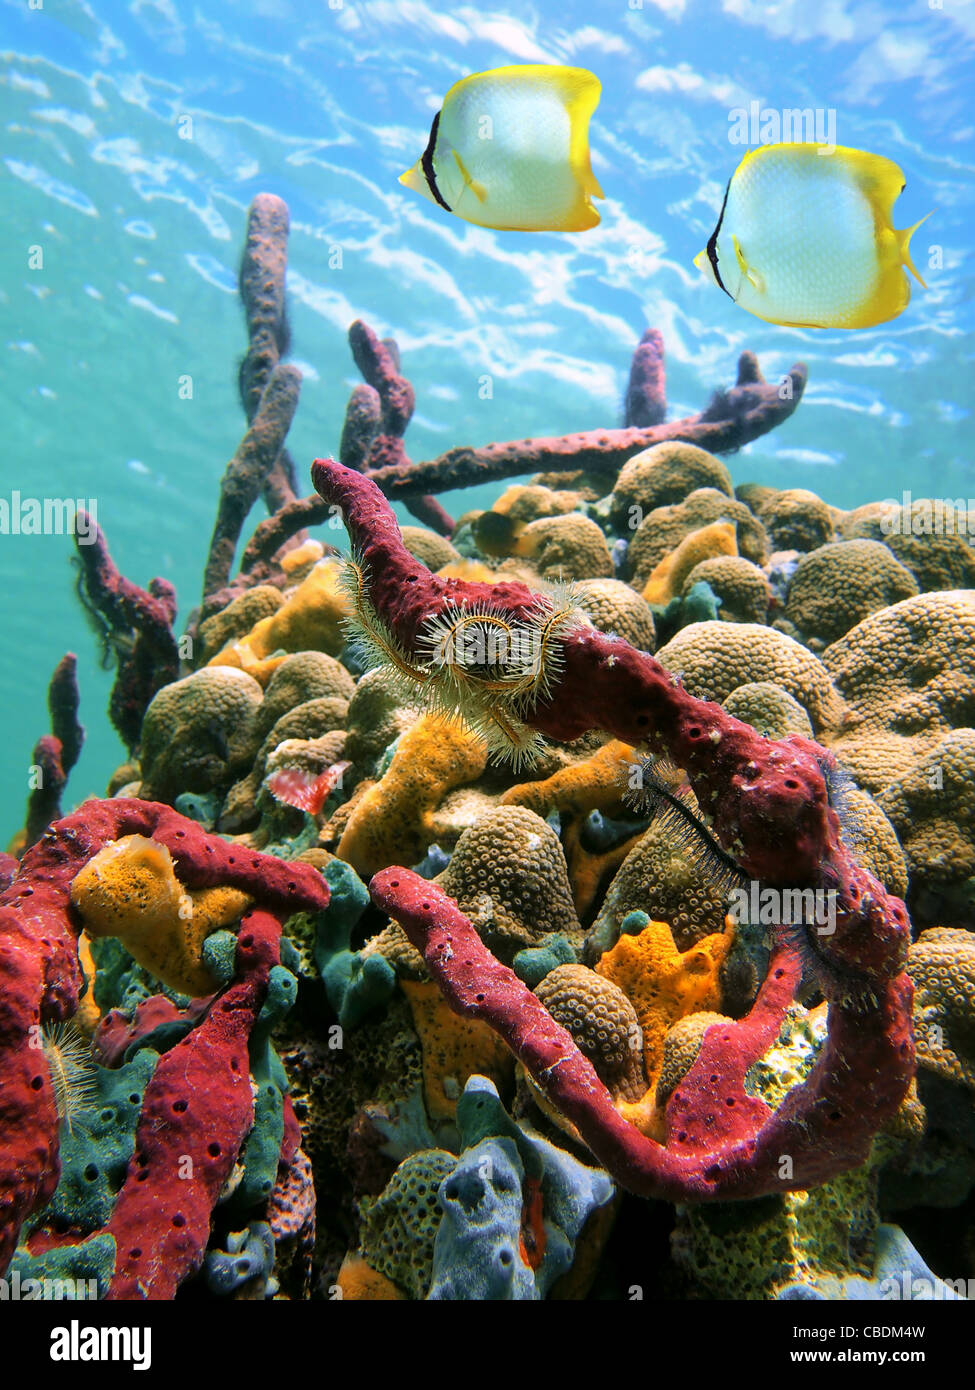 Colorful sea sponges and tropical fish in a coral reef with water surface in background, Caribbean sea Stock Photo